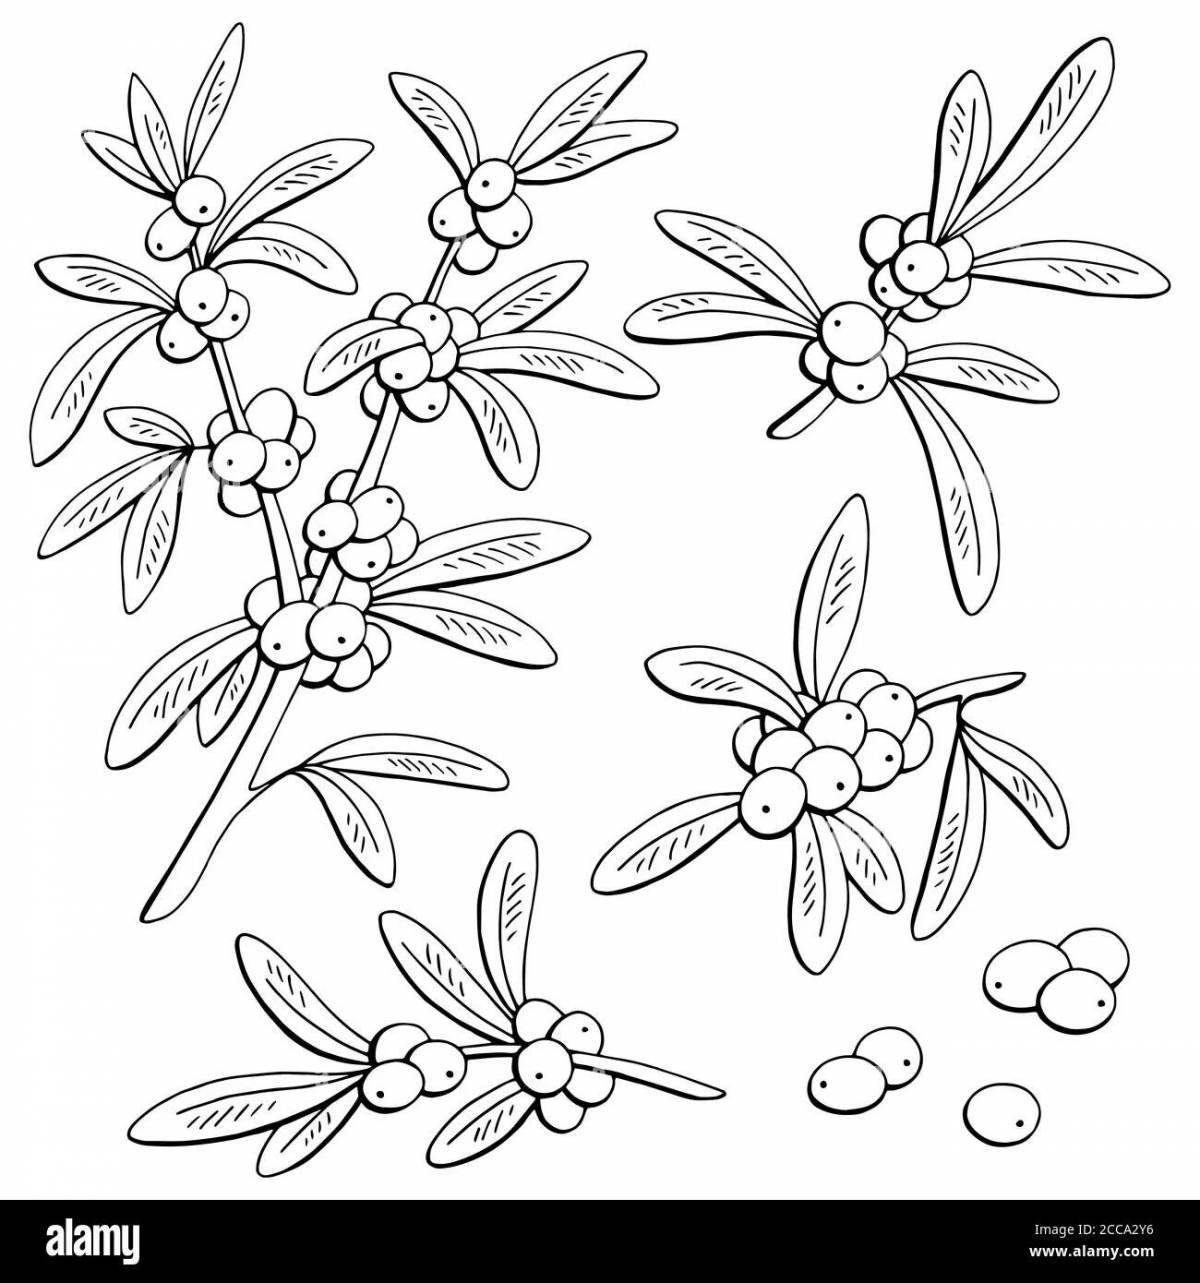 Intriguing sea buckthorn coloring book for kids